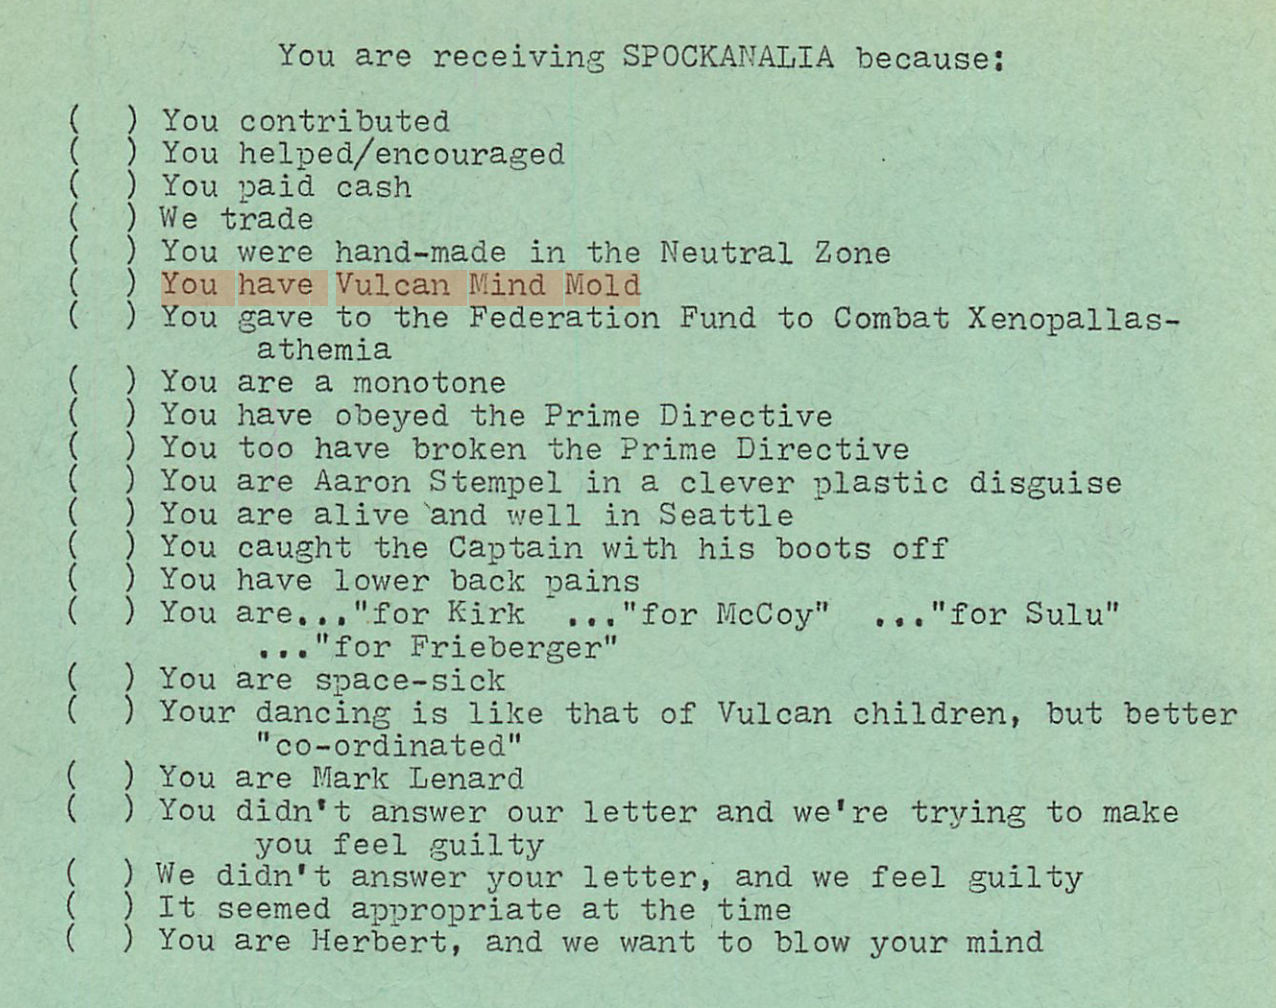 text:  "You are receiving SPOCKANALIA because: You contributed, You helped/encouraged, You paid cash, We trade, You were hand-made in the Neutral Zone, You have Vulcan Mind Mold, You gave to the Federation Fund to Combat Xenopallas- athemia, You are a monotone, You have obeyed the Prime Directive, You too have broken the Prime Directive, You are Aaron Stempel in a clever plastic disguise, You are alive and well in Seattle, You caught the Captain with his boots off, You have lower back pains, You are... ..."for McCoy" ..."for Sulu" ..."for Kirk", ..."for Frieberger", You are space-sick, Your dancing is like that of Vulcan children, but better "co-ordinated", You are Mark Lenard, You didn't answer our letter and we're trying to make you feel guilty, We didn't answer your letter, and we feel guilty, It seemed appropriate at the time, You are Herbert, and we want to blow your mind"